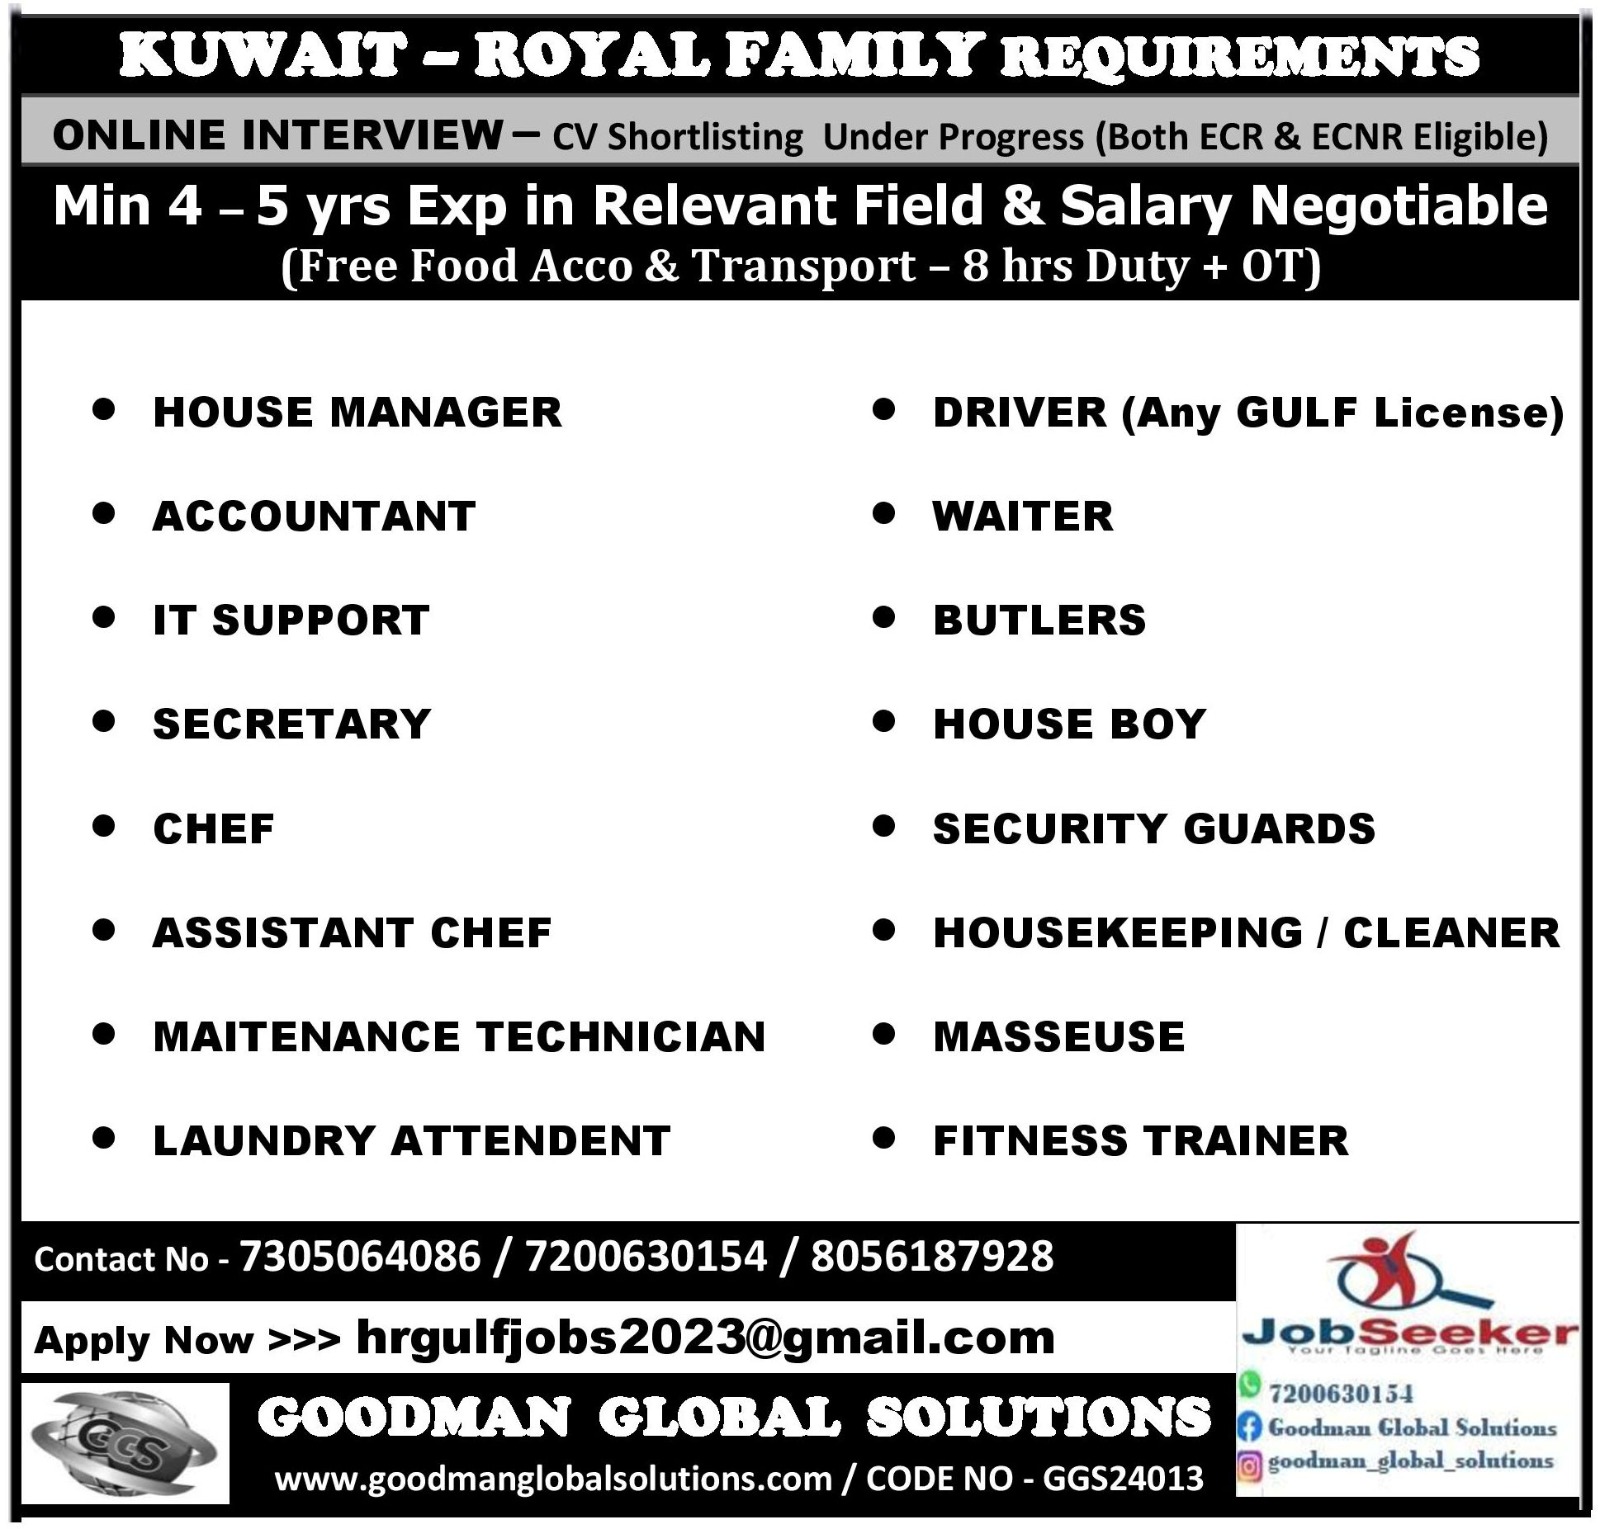 KUWAIT – ROYAL FAMILY REQUIREMENT | Online Interview